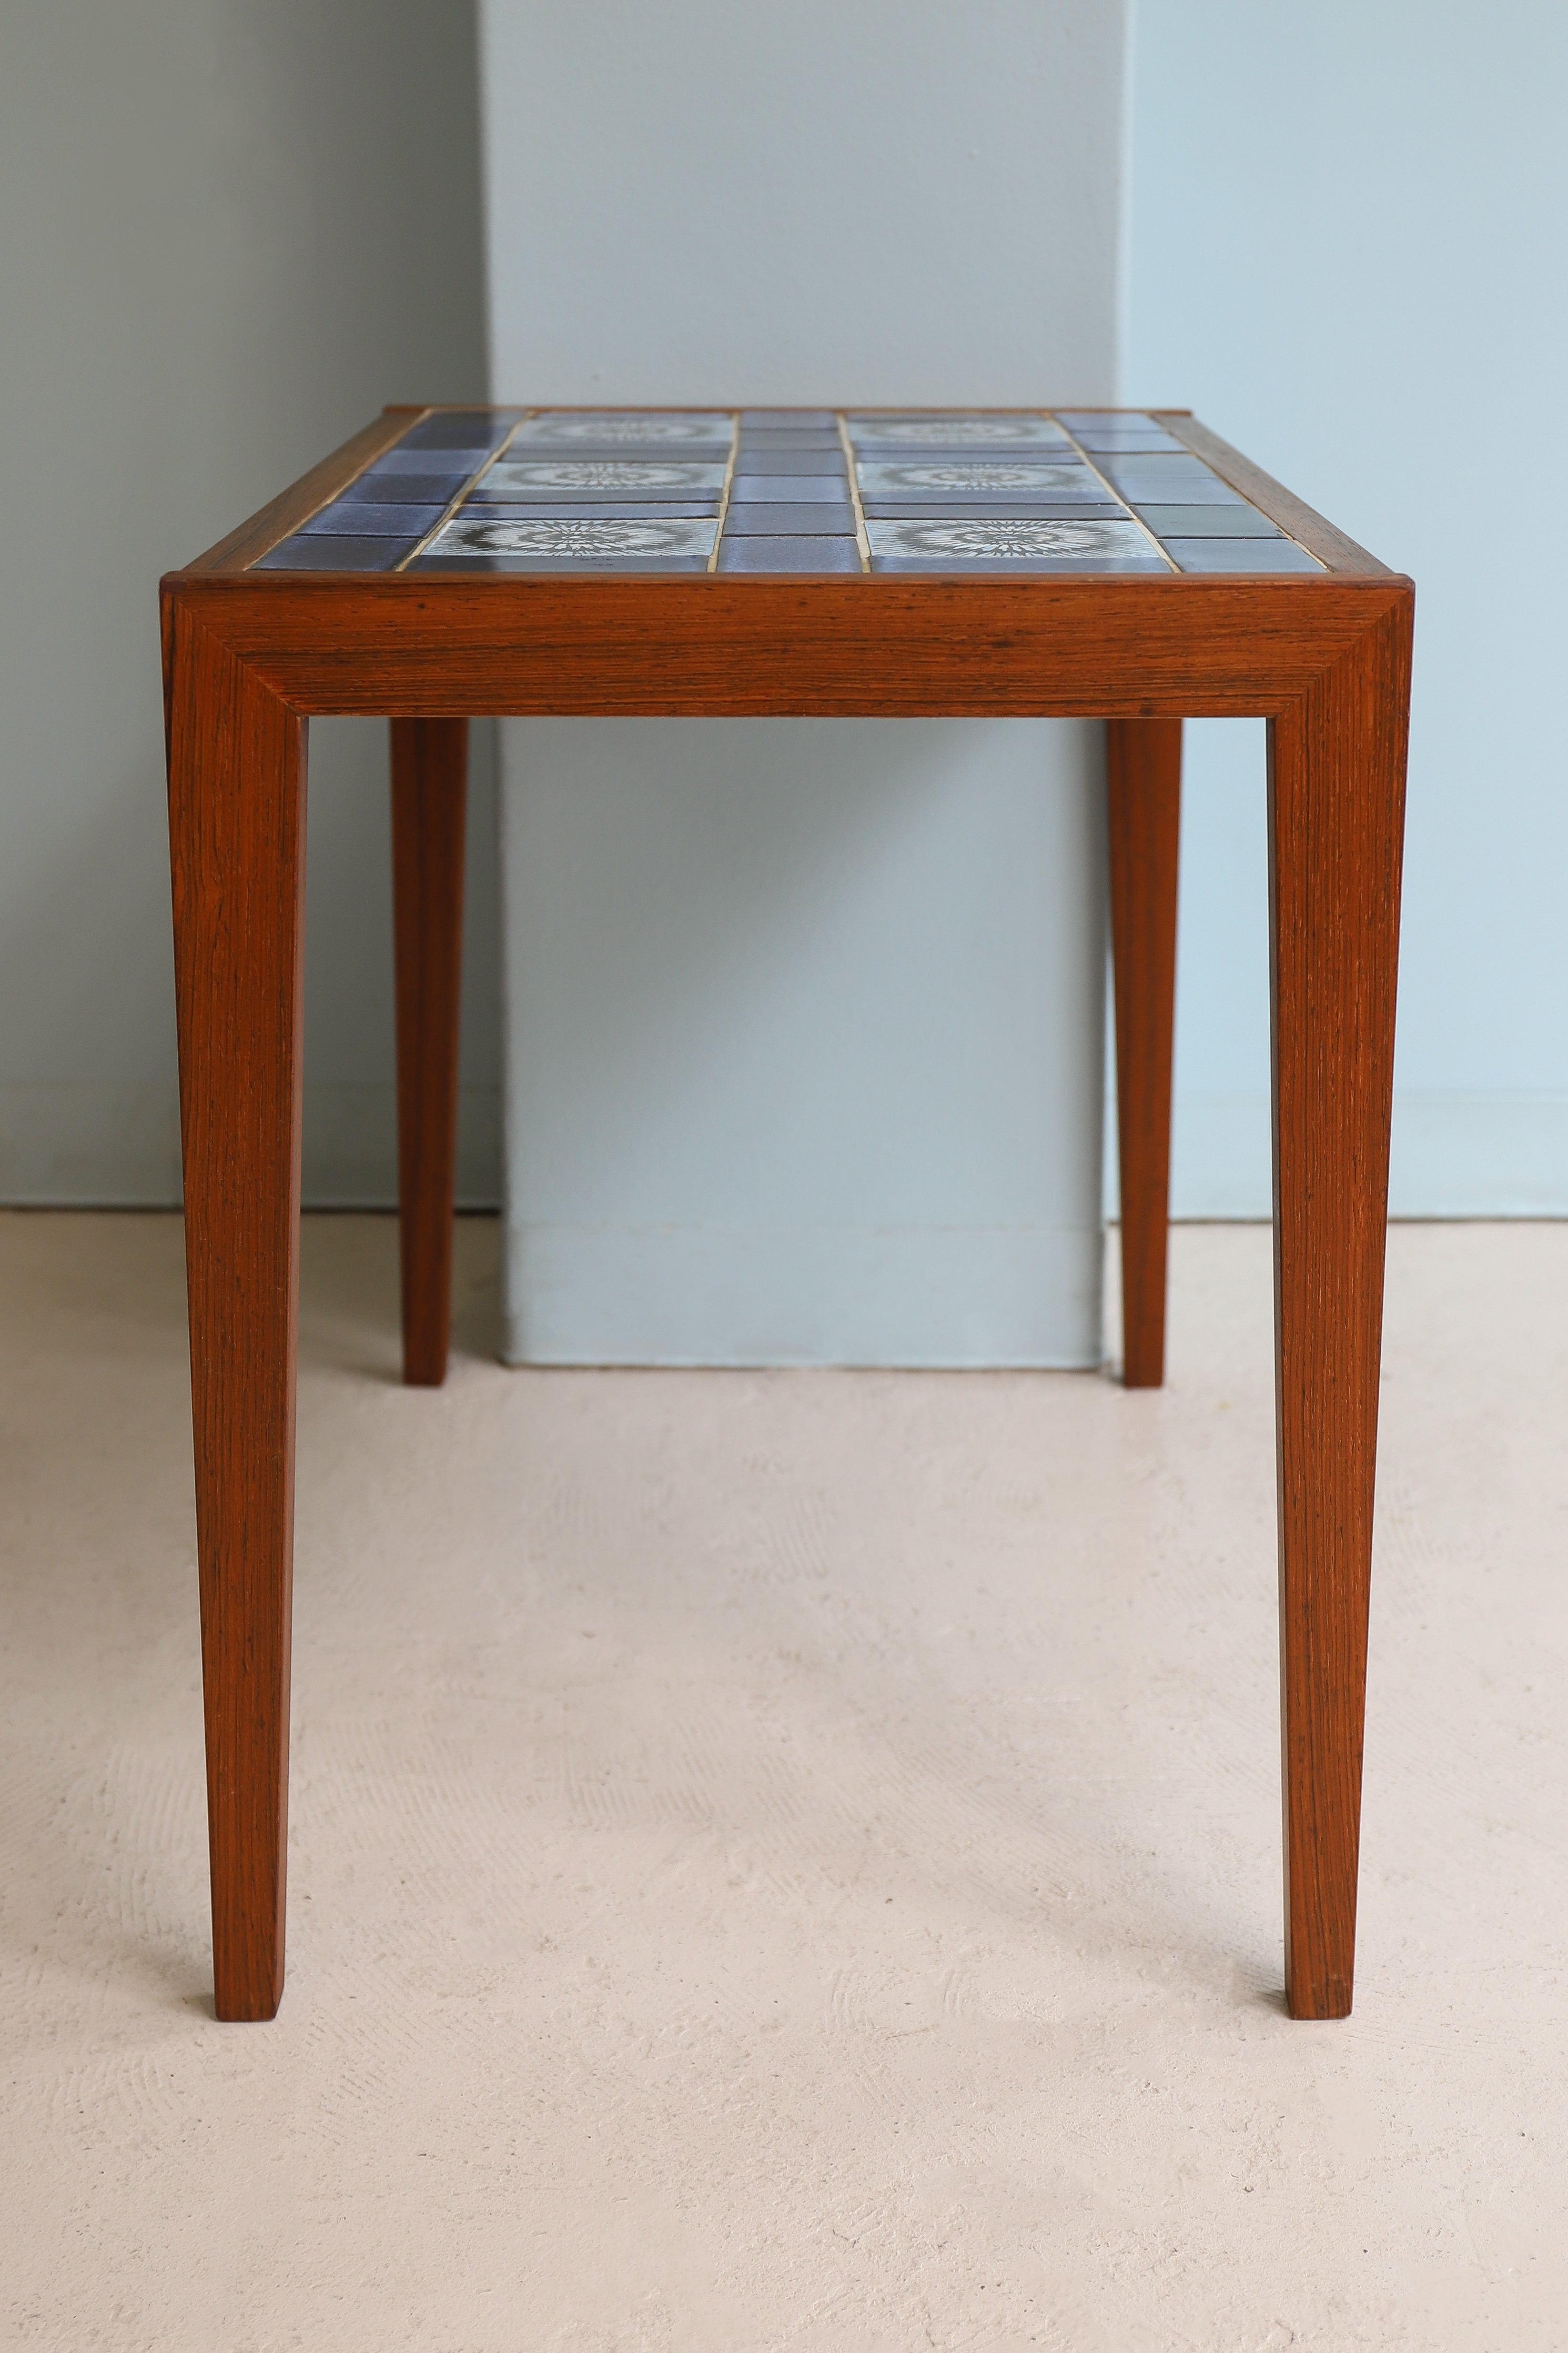 Danish Vintage Side Table Rosewood with Ceramic Tile/デンマークヴィンテージ サイドテーブル ローズウッド タイルトップ 北欧家具